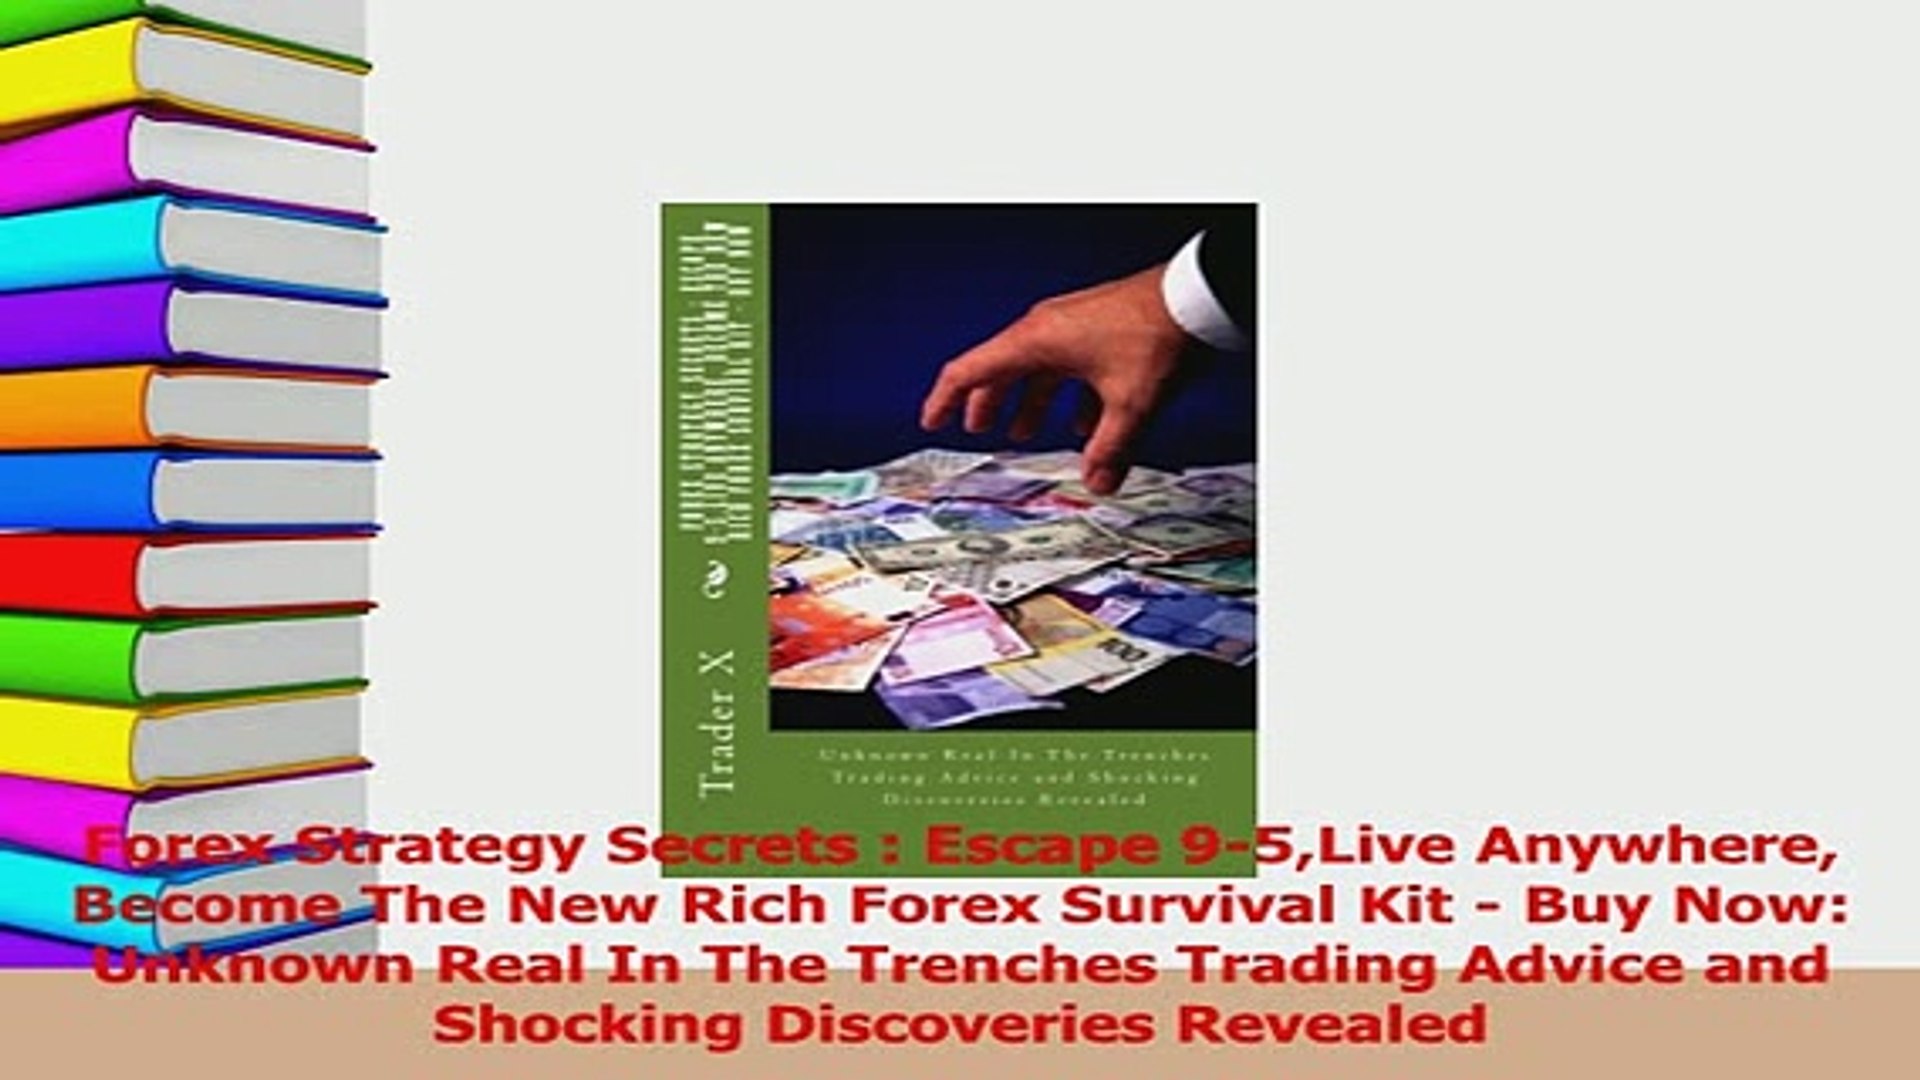 Pdf Forex Strategy Secrets Escape 95live Anywhere Become The New Rich Forex Survival Kit R!   ead Online - 